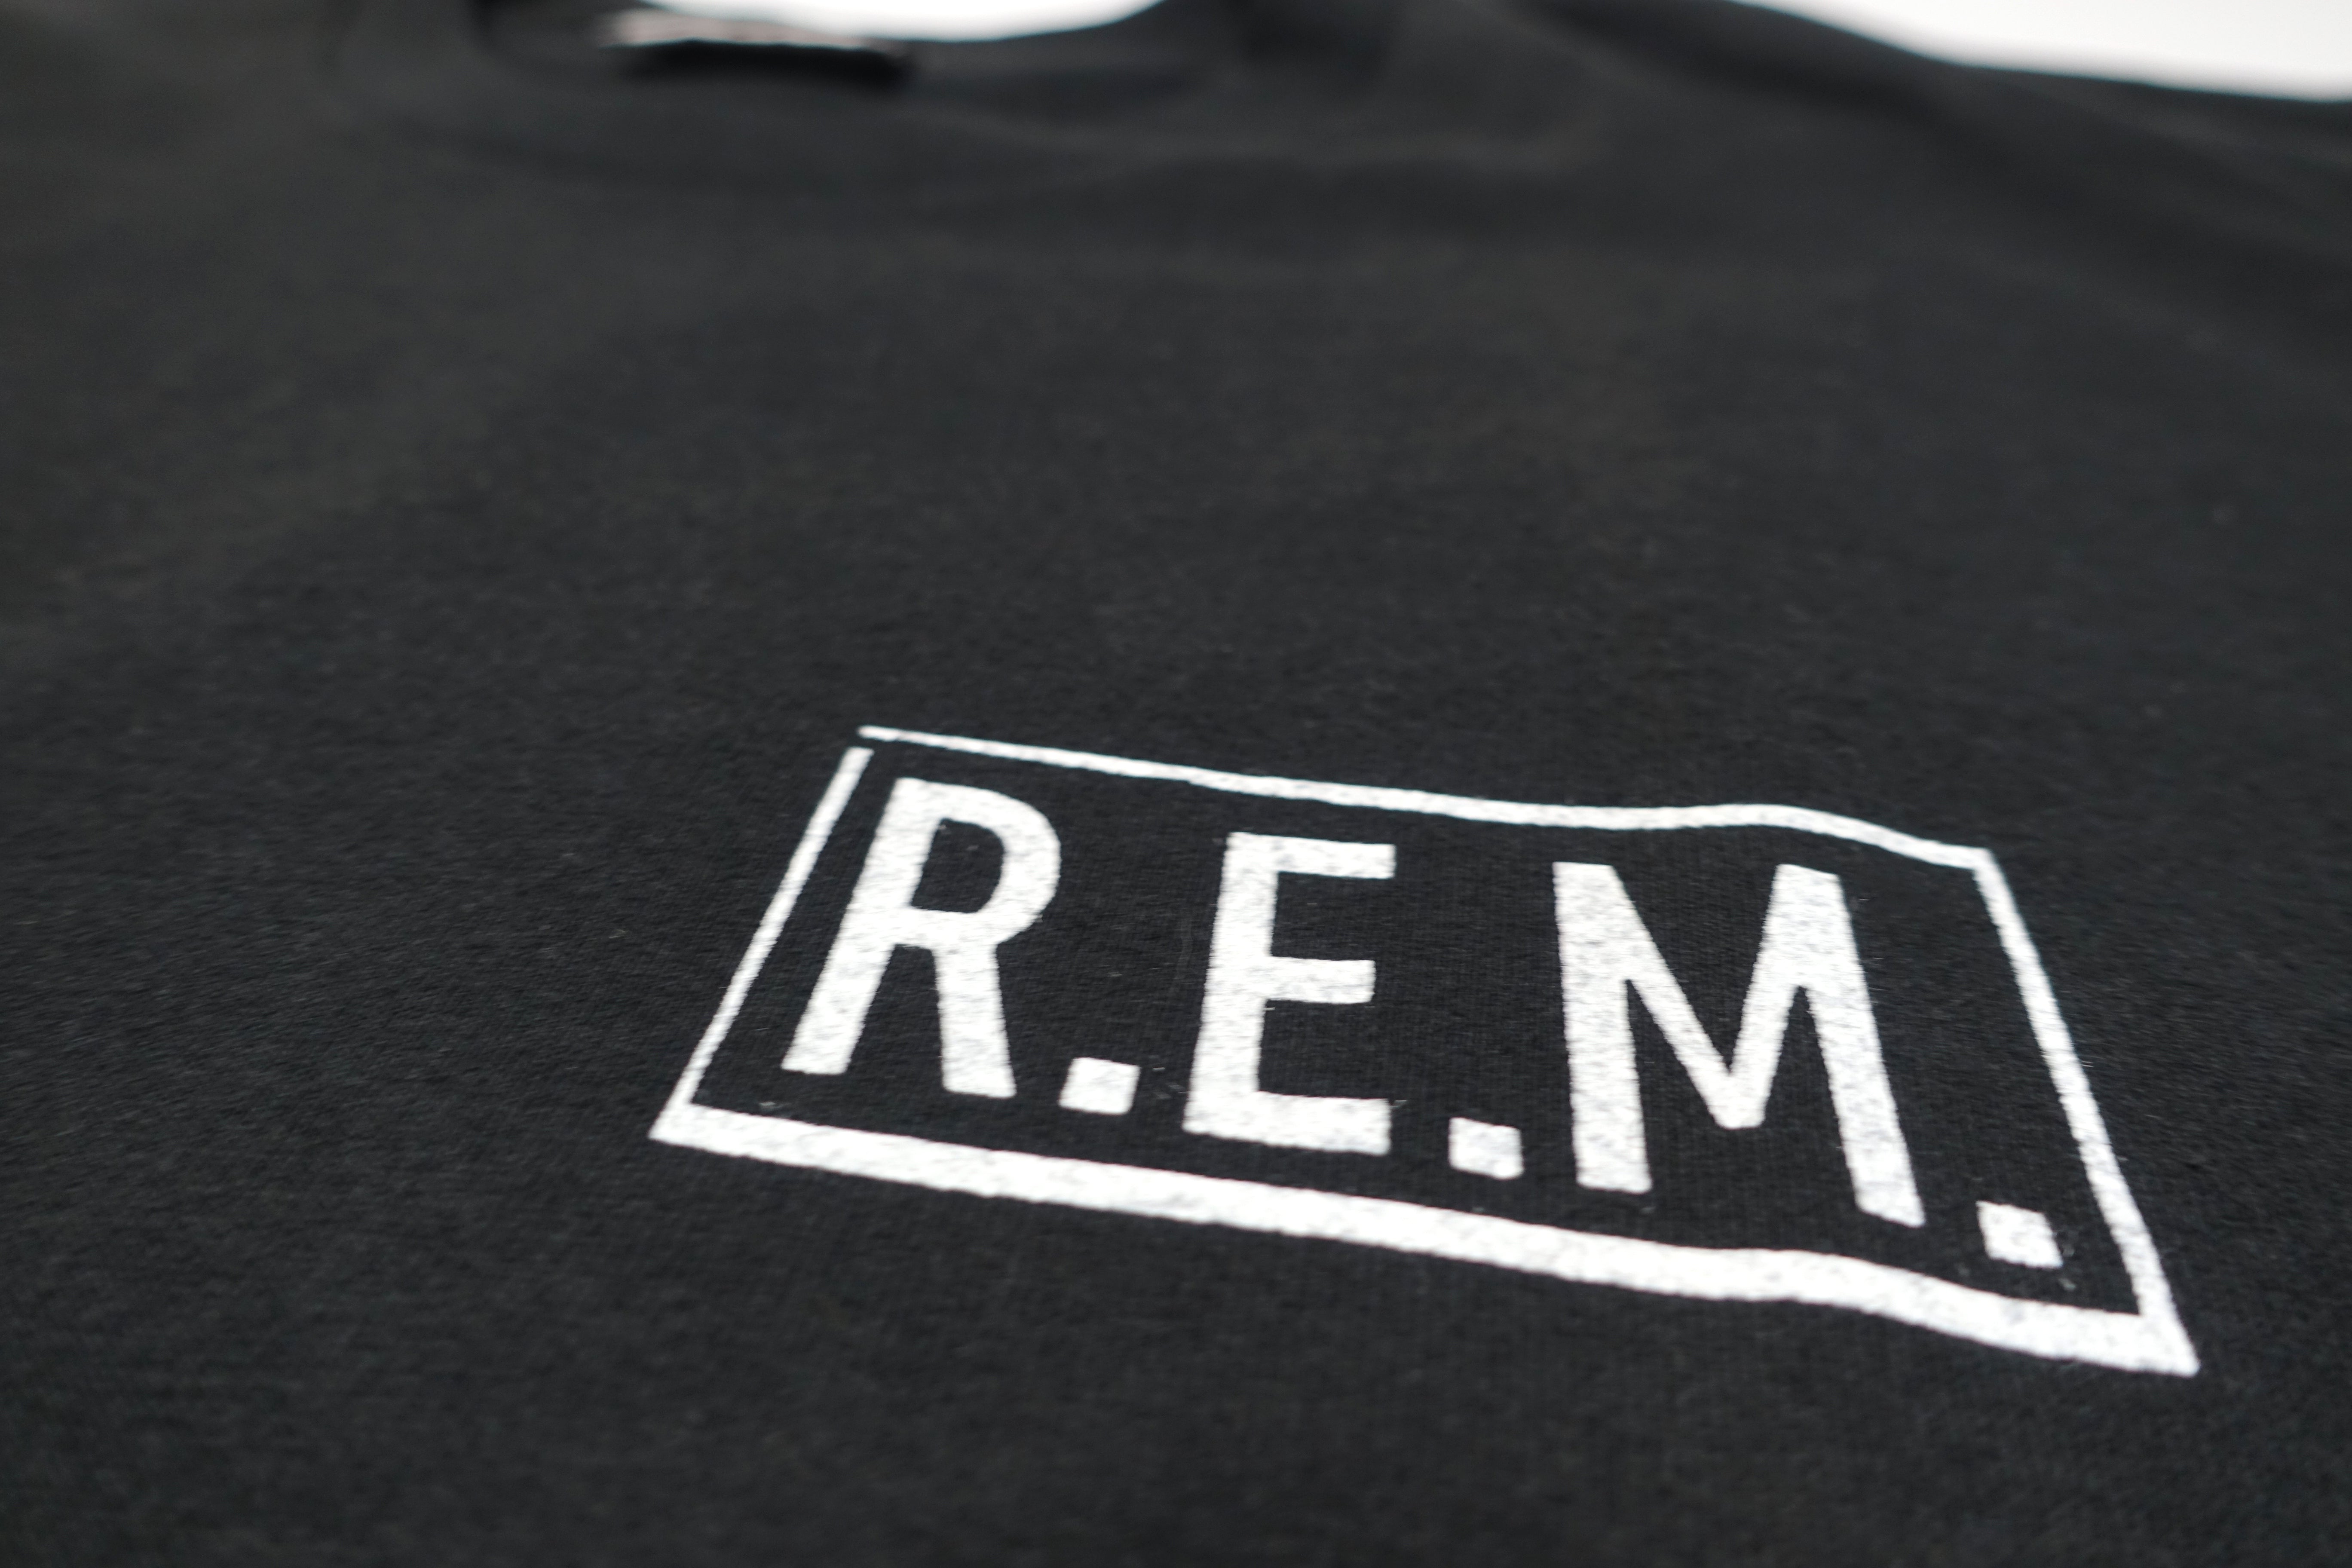 R.E.M. ‎– Gas Station Automatic For The People 1993 (Lee) Tour Shirt Size XL